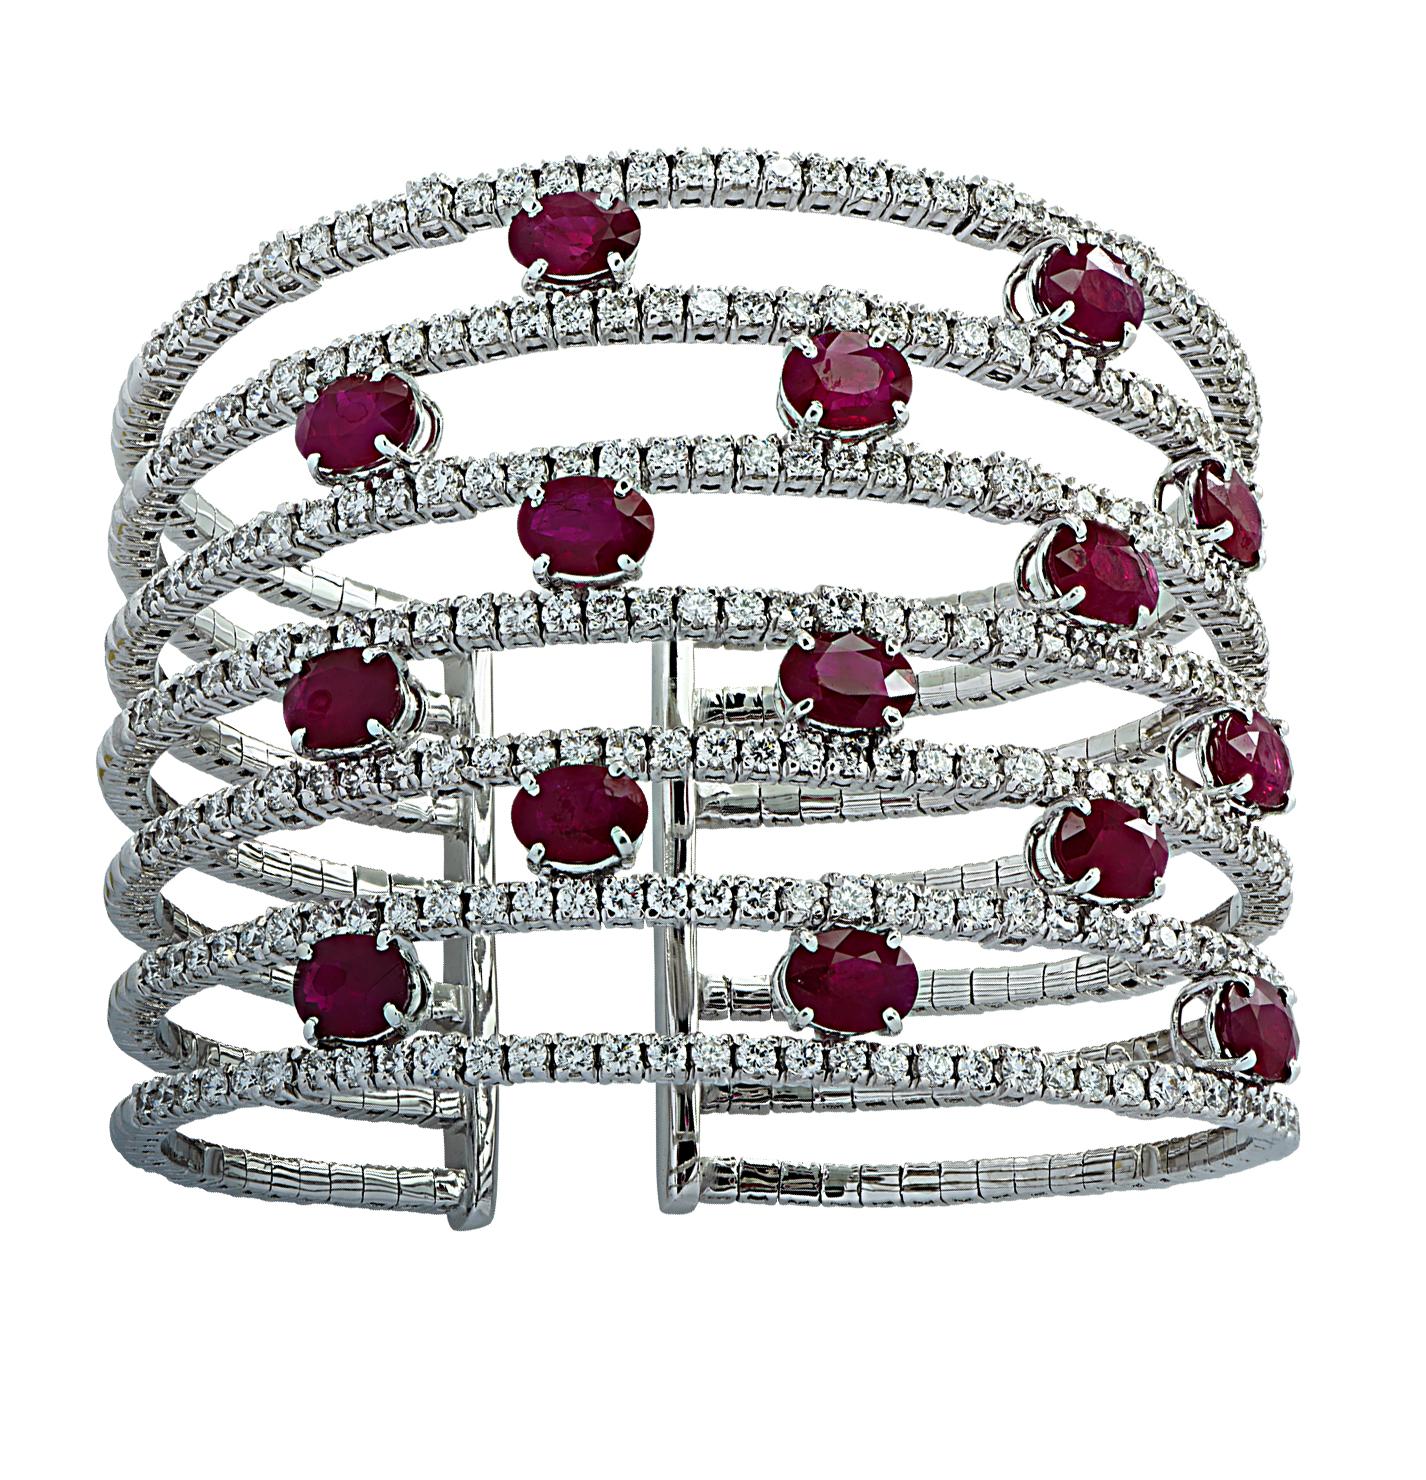 Stunning Diamond and Ruby cuff bangle bracelet crafted in 18 karat white gold, featuring 15 Oval rubies weighing approximately 15.93 carats total and round brilliant cut diamonds weighing approximately 9.62 carats total, G color, VS clarity. Seven